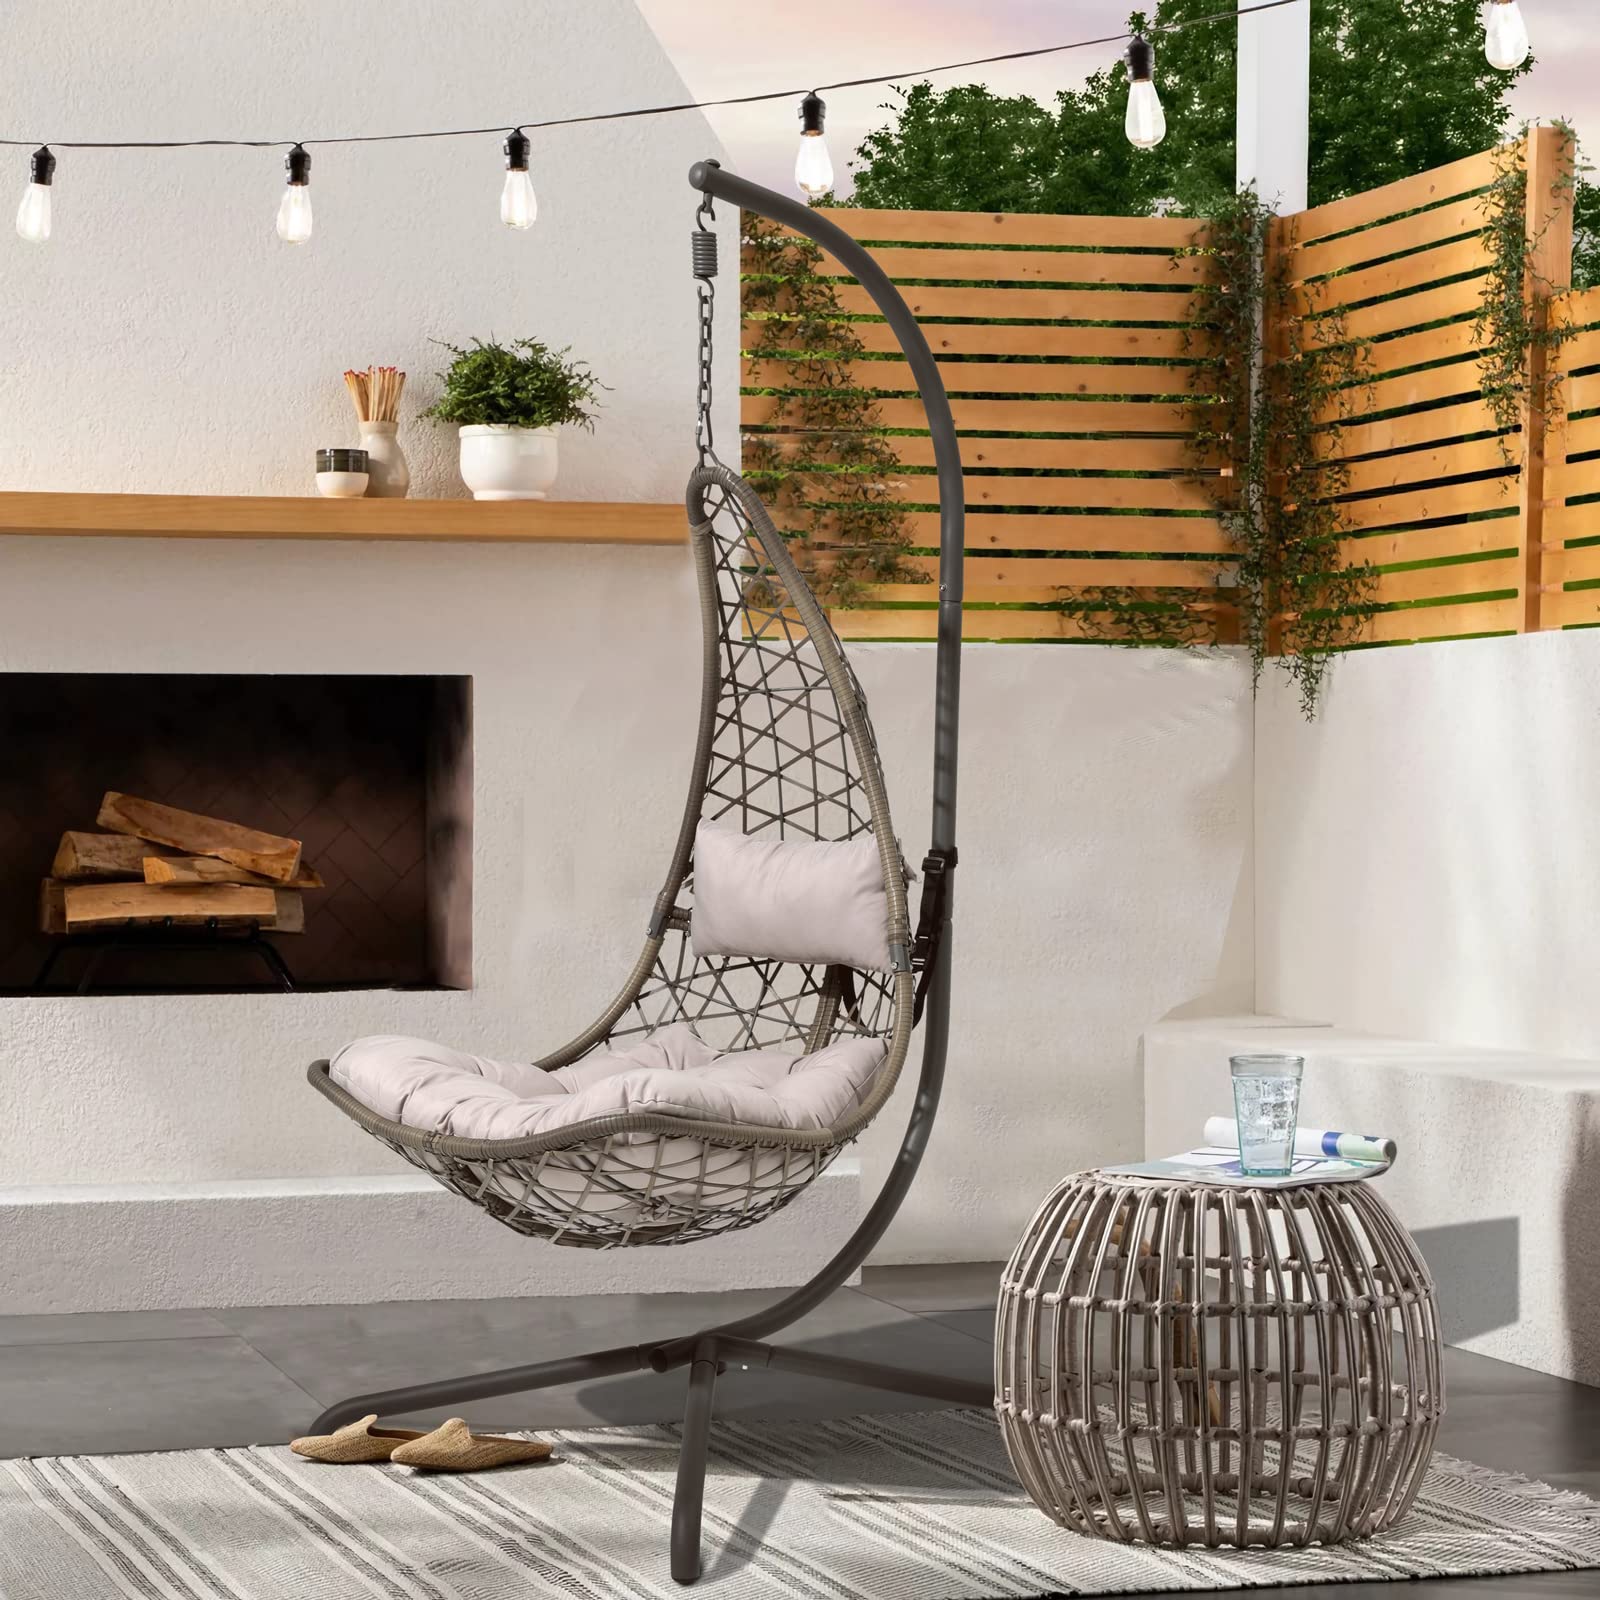 JOIVI Swing Egg Chair Outdoor Indoor Wicker Hammock Hanging Chair, Patio Rattan Lounge Chair with Steel Frame, Stand and Cushions for Balcony, Deck, Bedroom, Gray - image 1 of 8